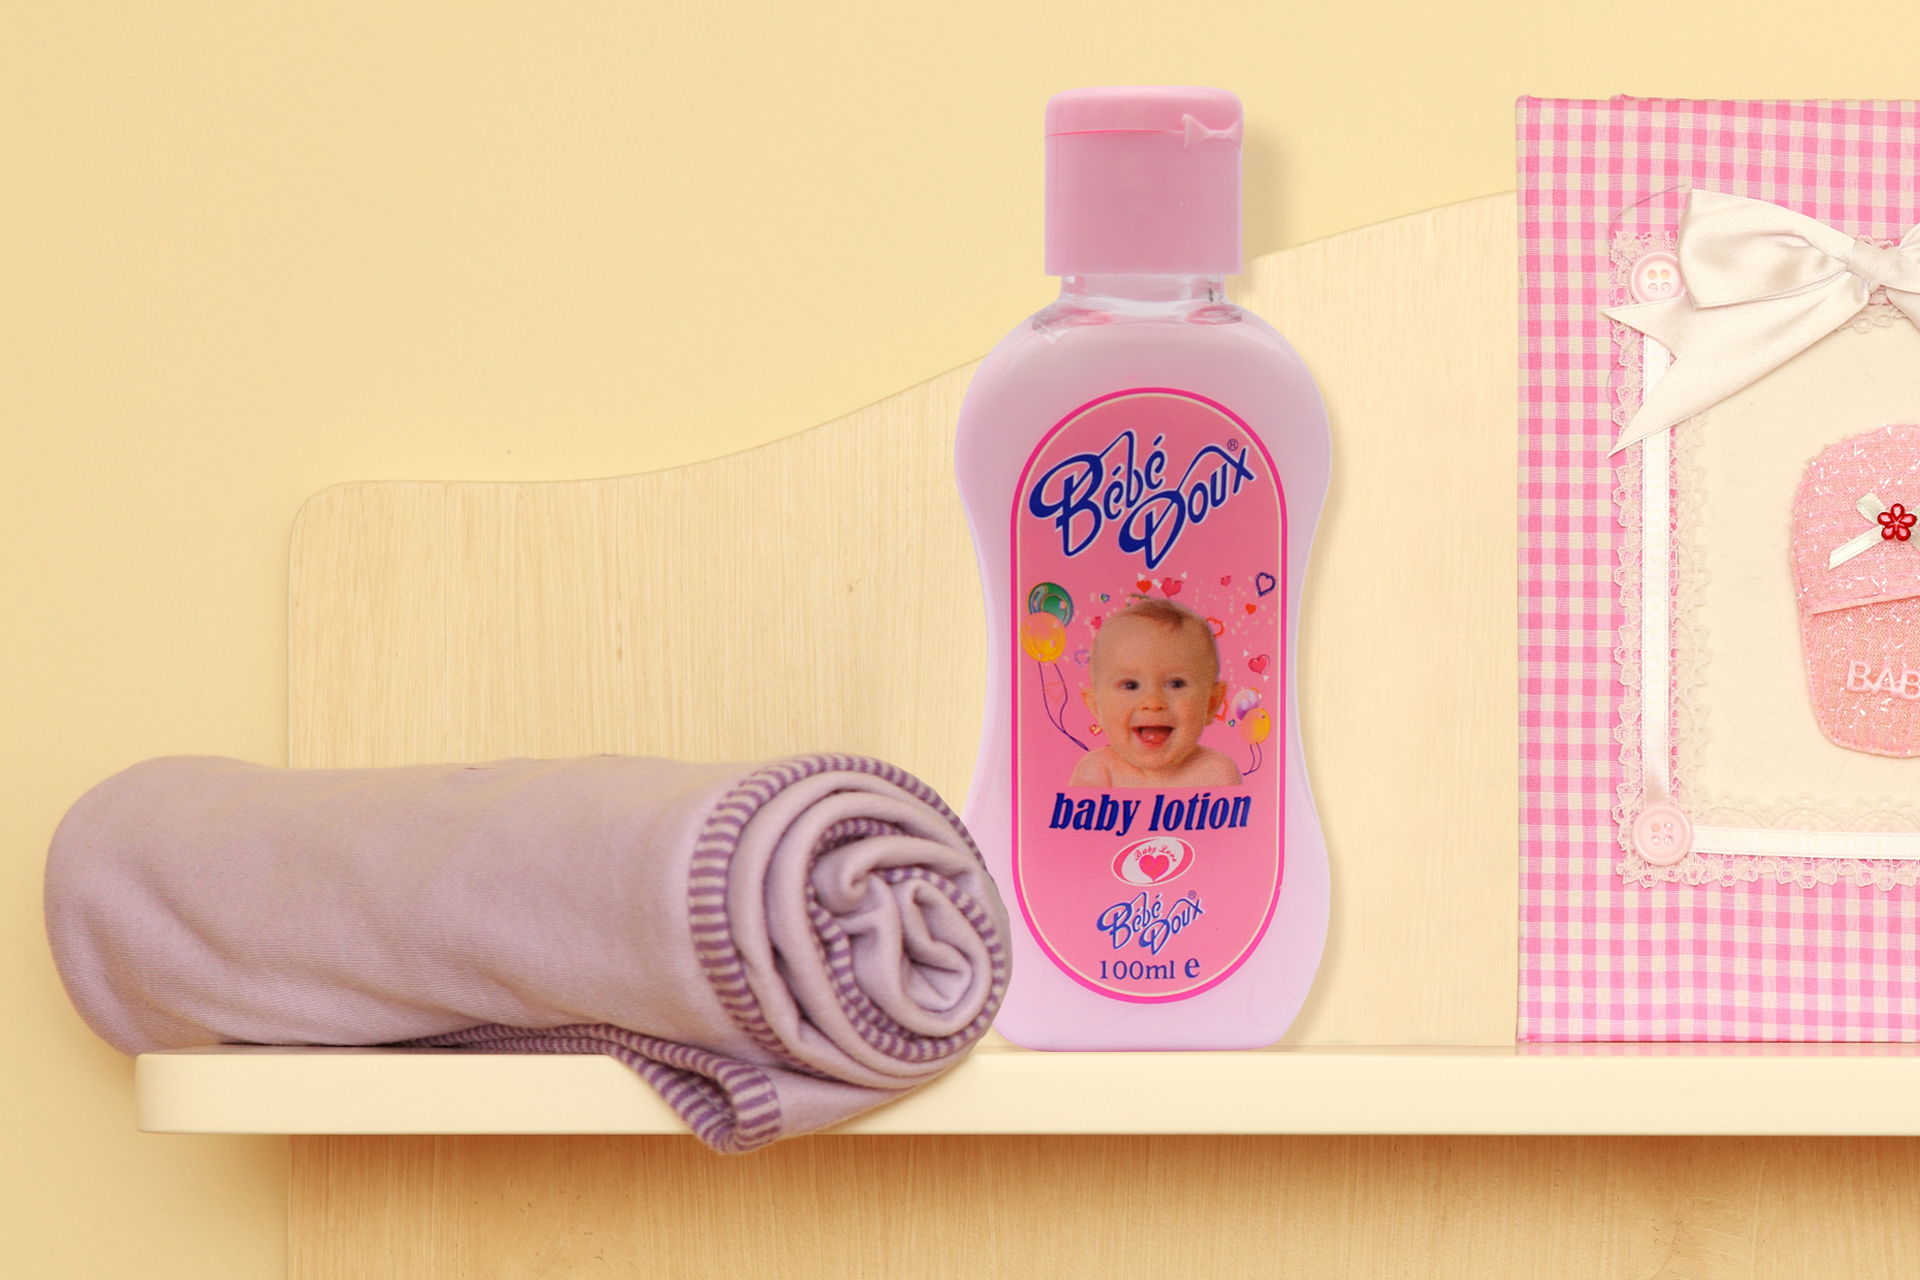 https://orbitsarl.com/wp-content/uploads/2017/08/Product-Baby_BabeDoux-Baby-Lotion-100ml_1920x1280-FIN.jpg